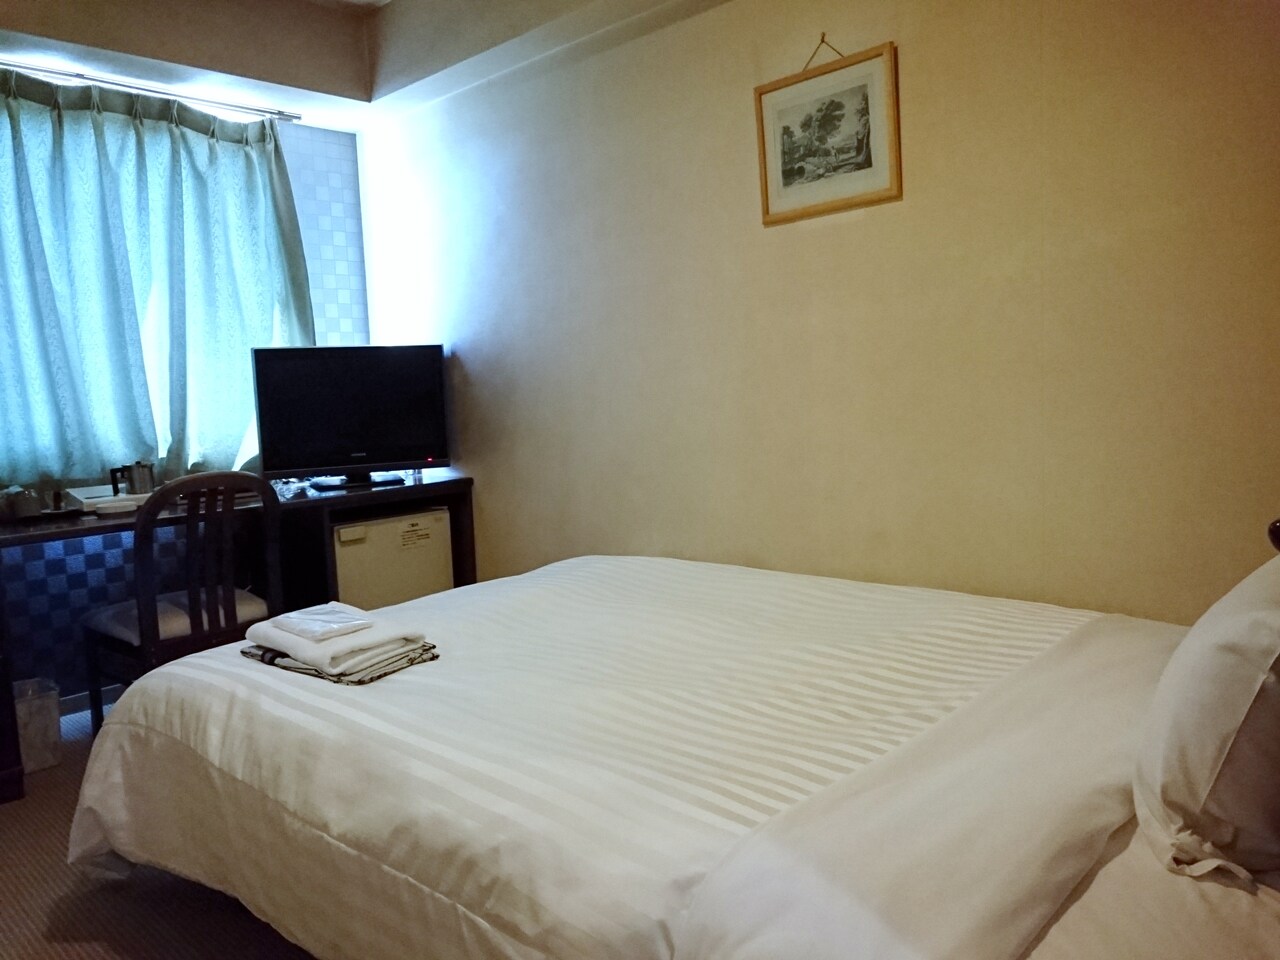 [Economy Double Room] Approximately 15 square meters, 1 double bed (140 cm)